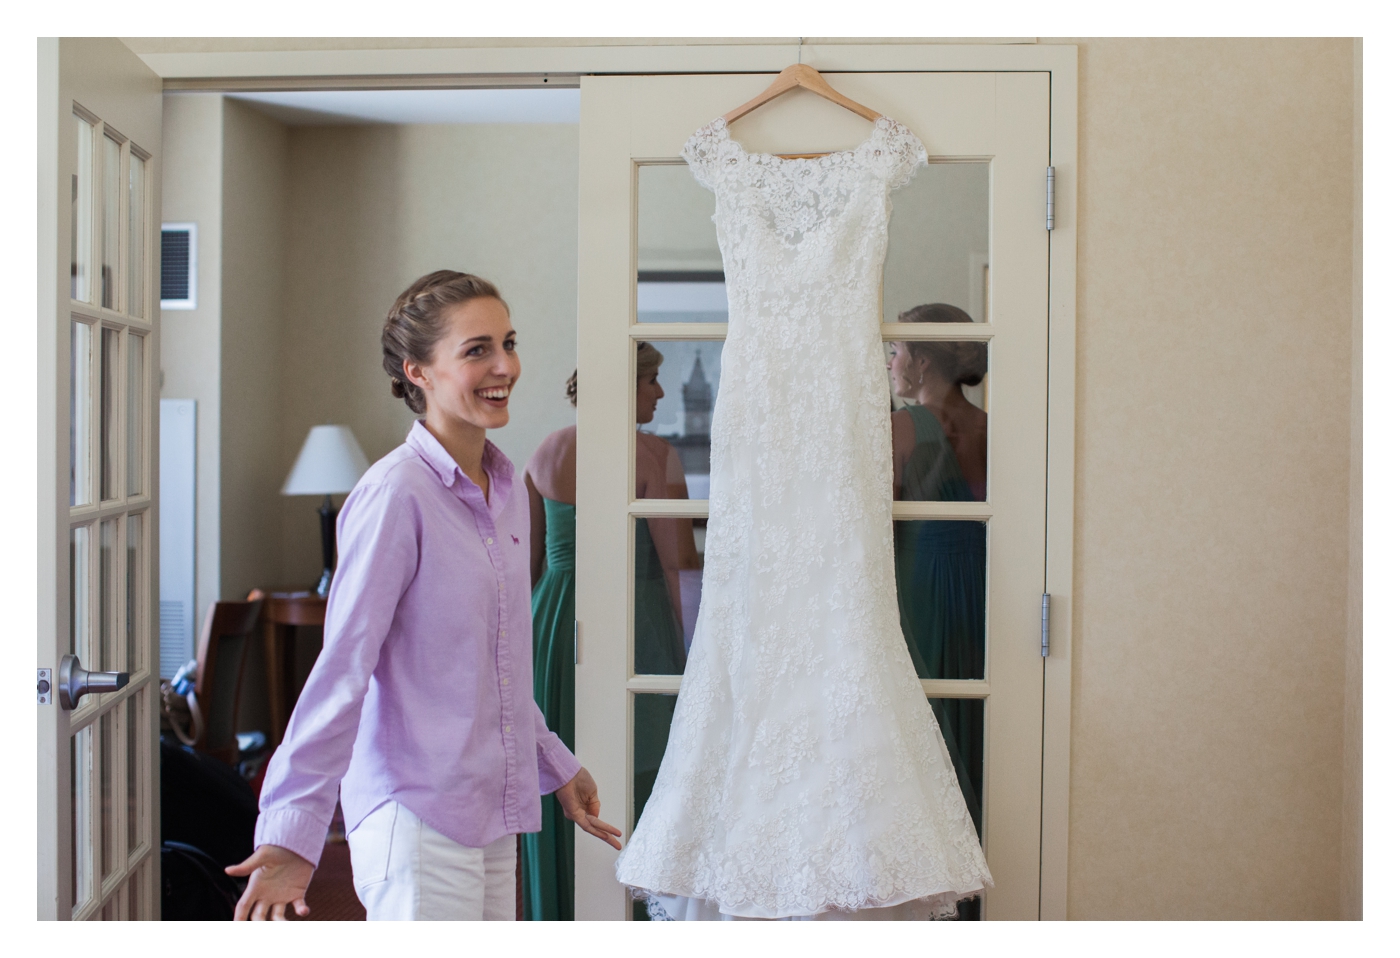 5 Reasons Why You Should Have Getting Ready Coverage The Day of Your Wedding - Michele Ashley Photography